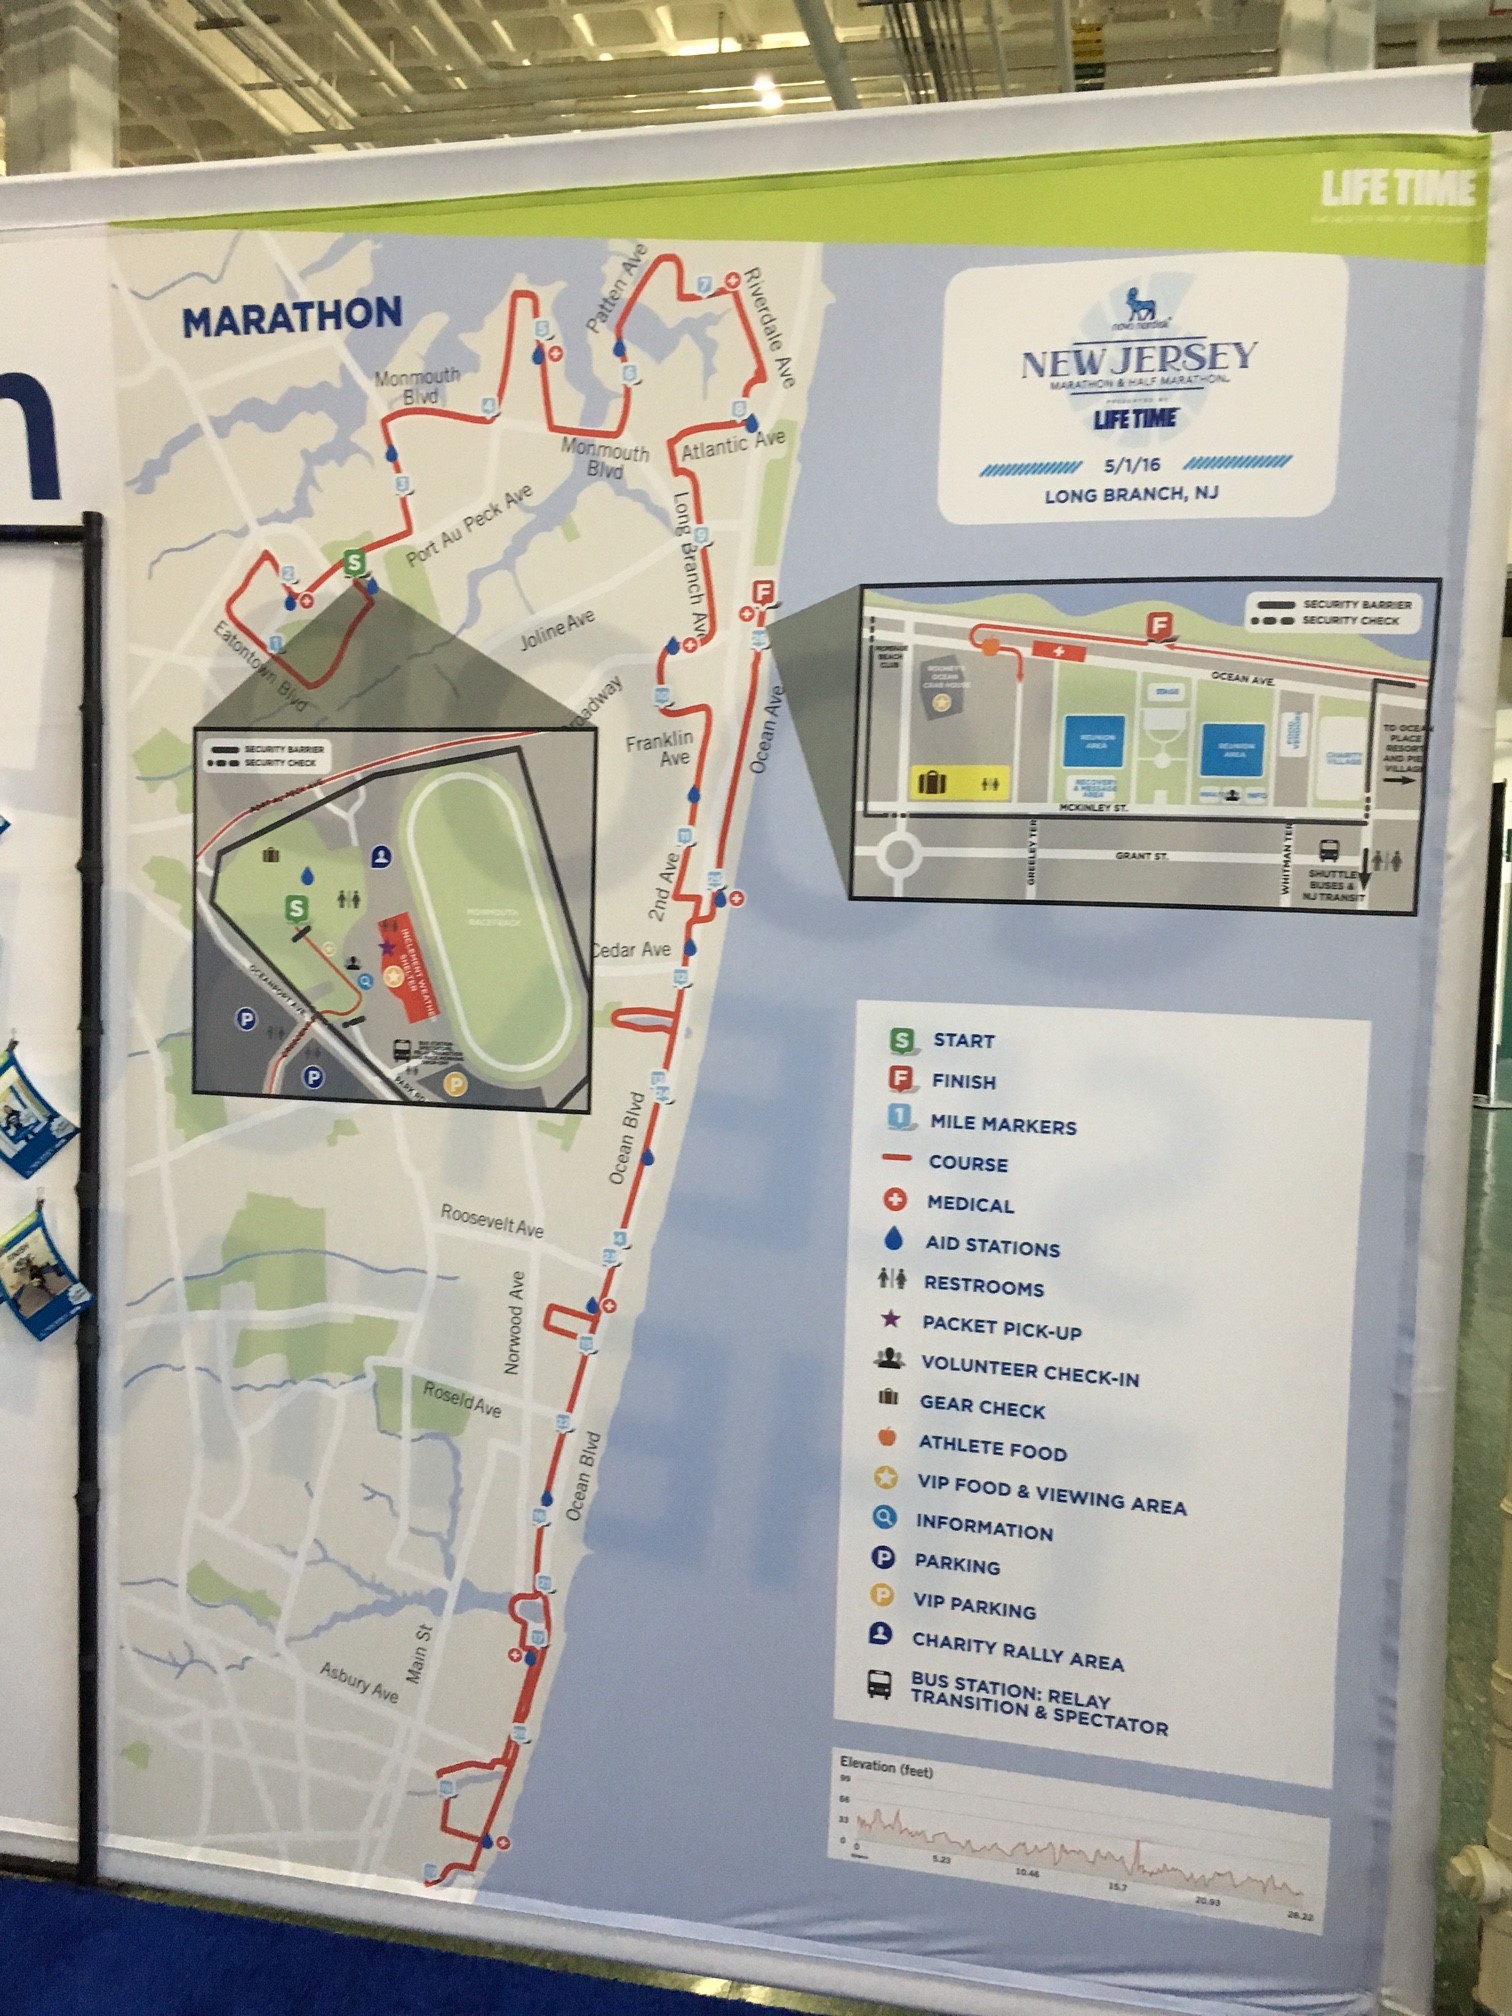 The course map that was displayed at the expo